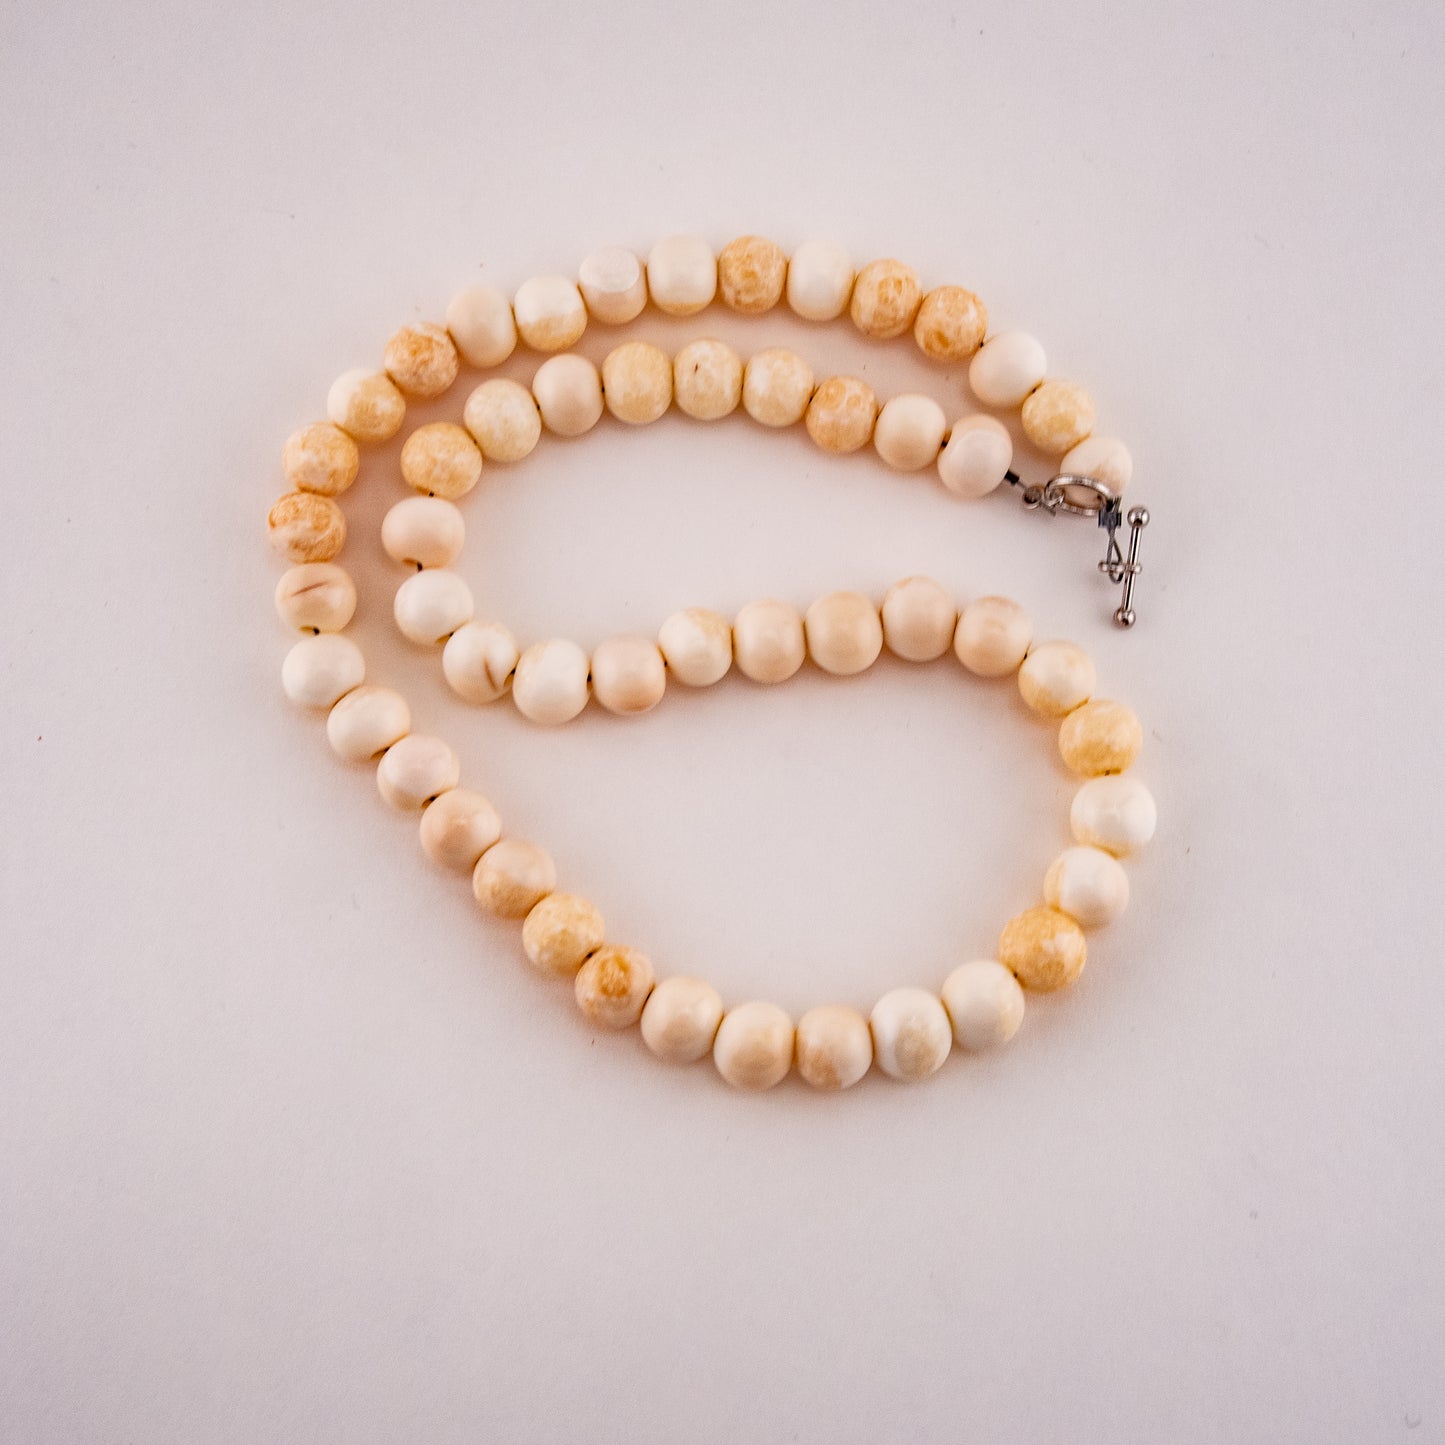 Walrus Ivory Pearl Necklace 21 Inch